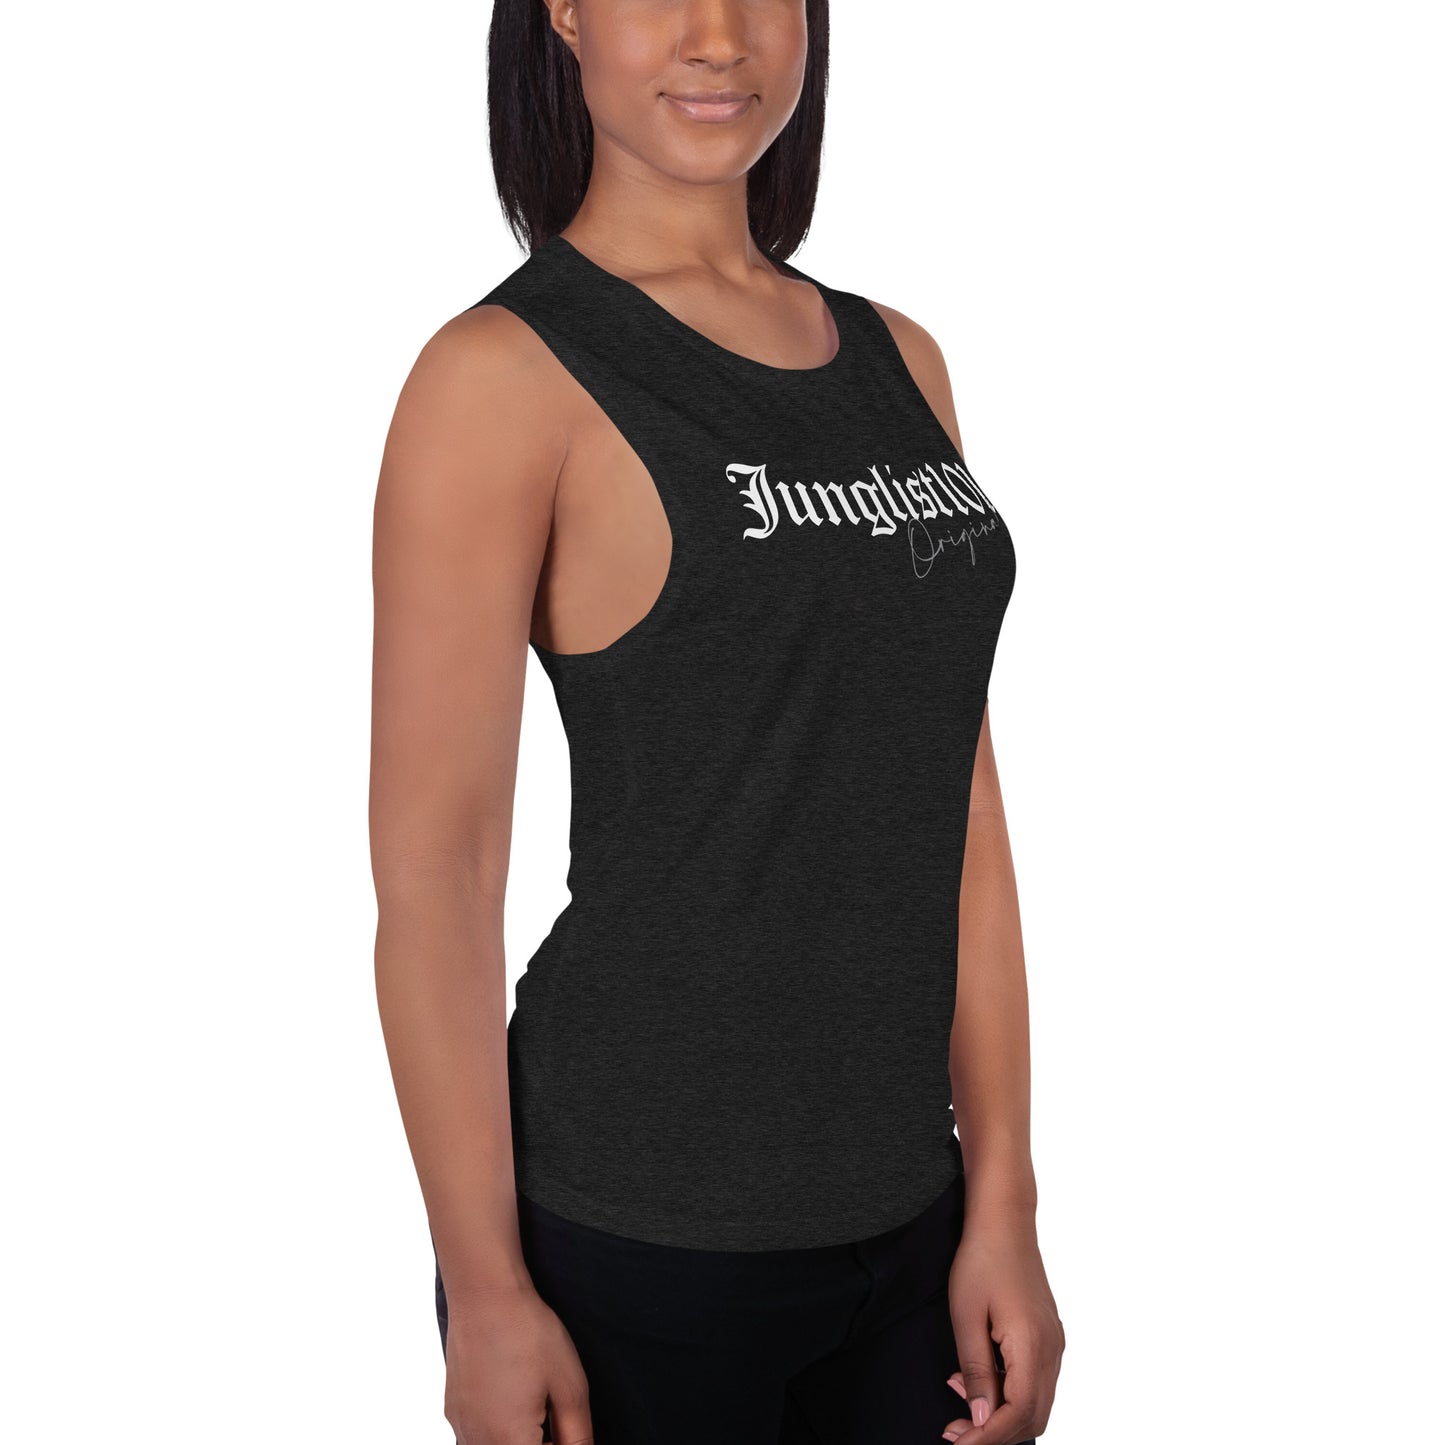 Junglist101 (v1) Ladies’ Muscle Tank (White Text)